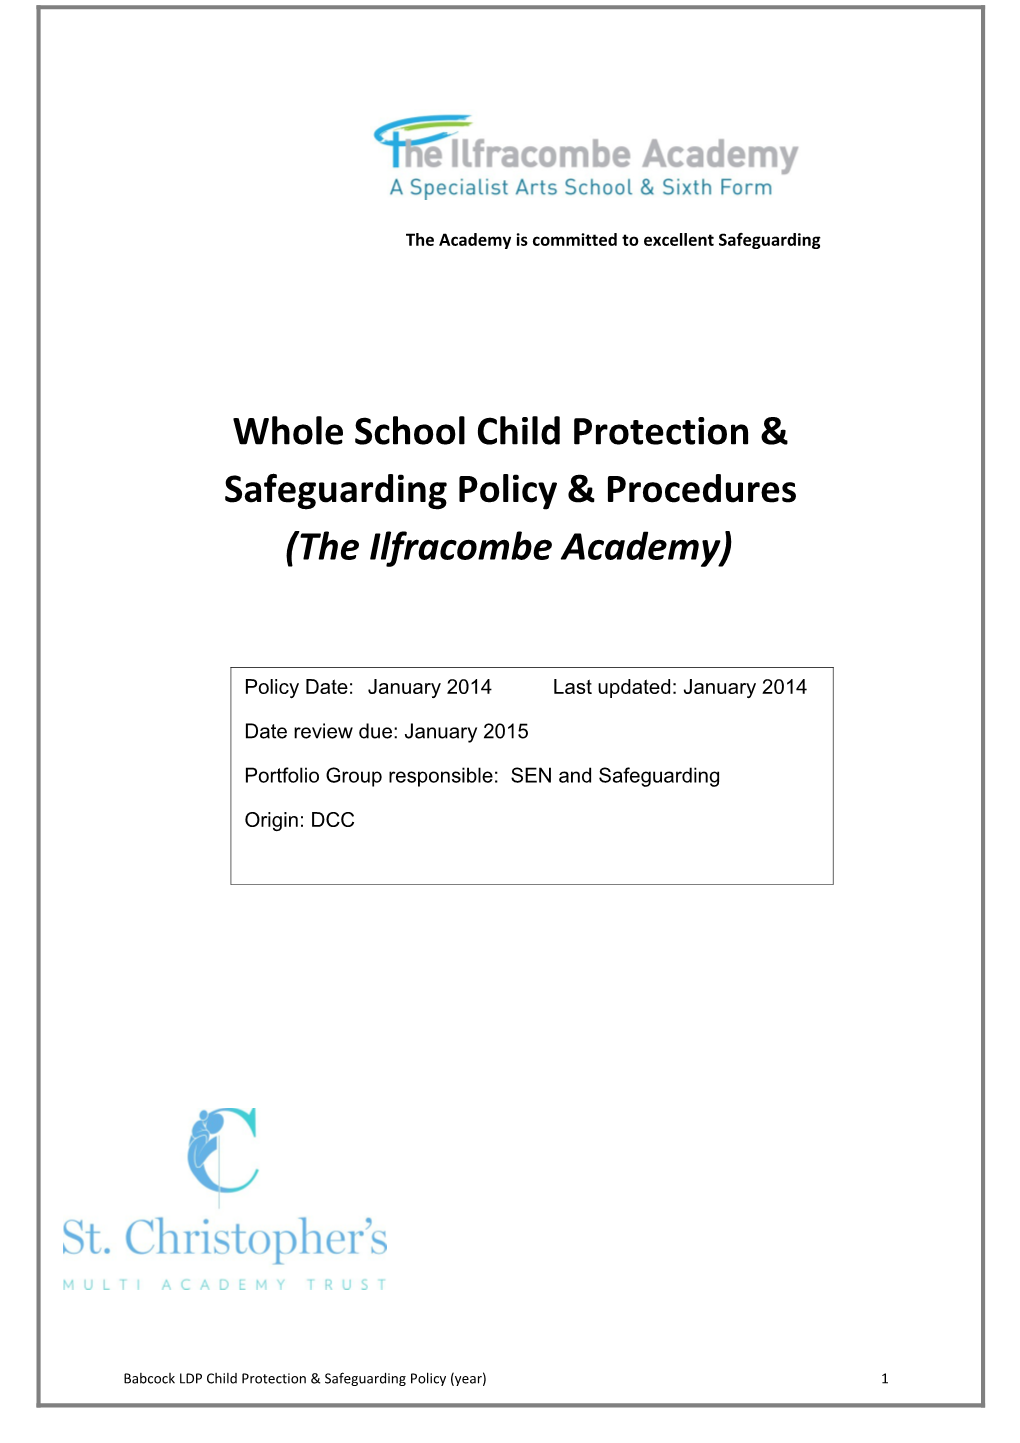 Whole School Child Protection & Safeguarding Policy & Procedures (The Ilfracombe Academy)